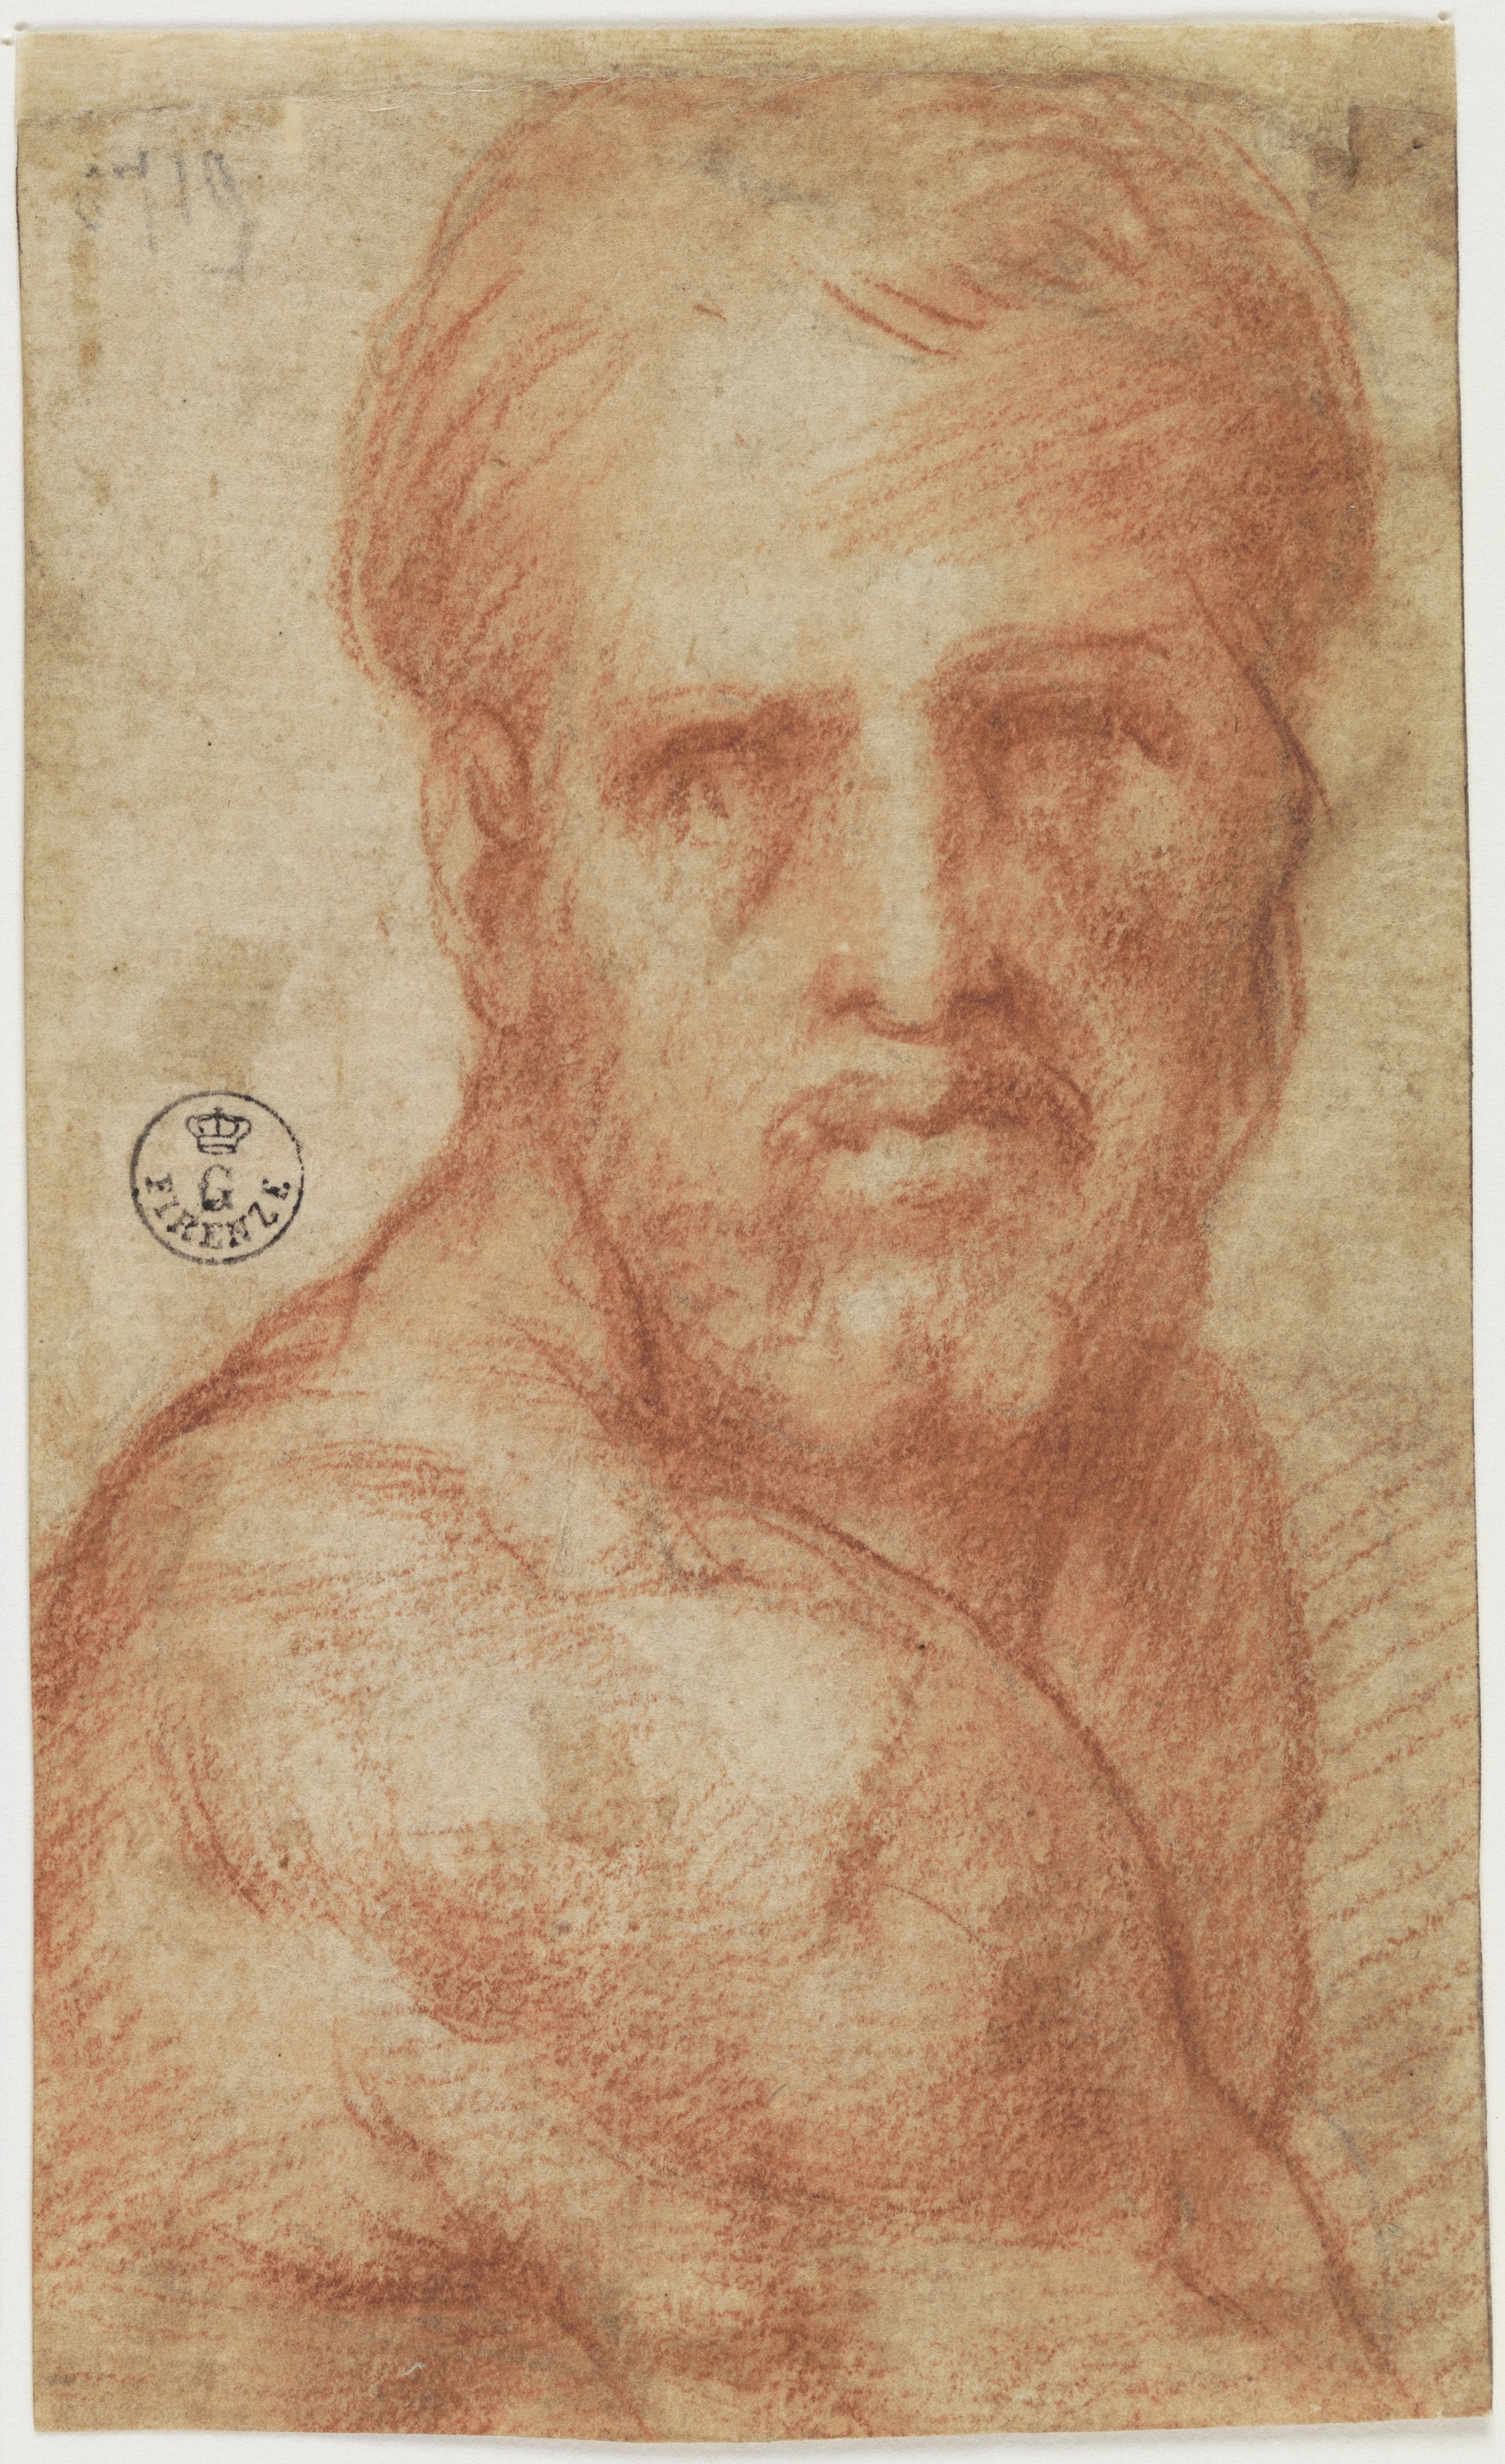 Self-portrait on paper by Pontormo